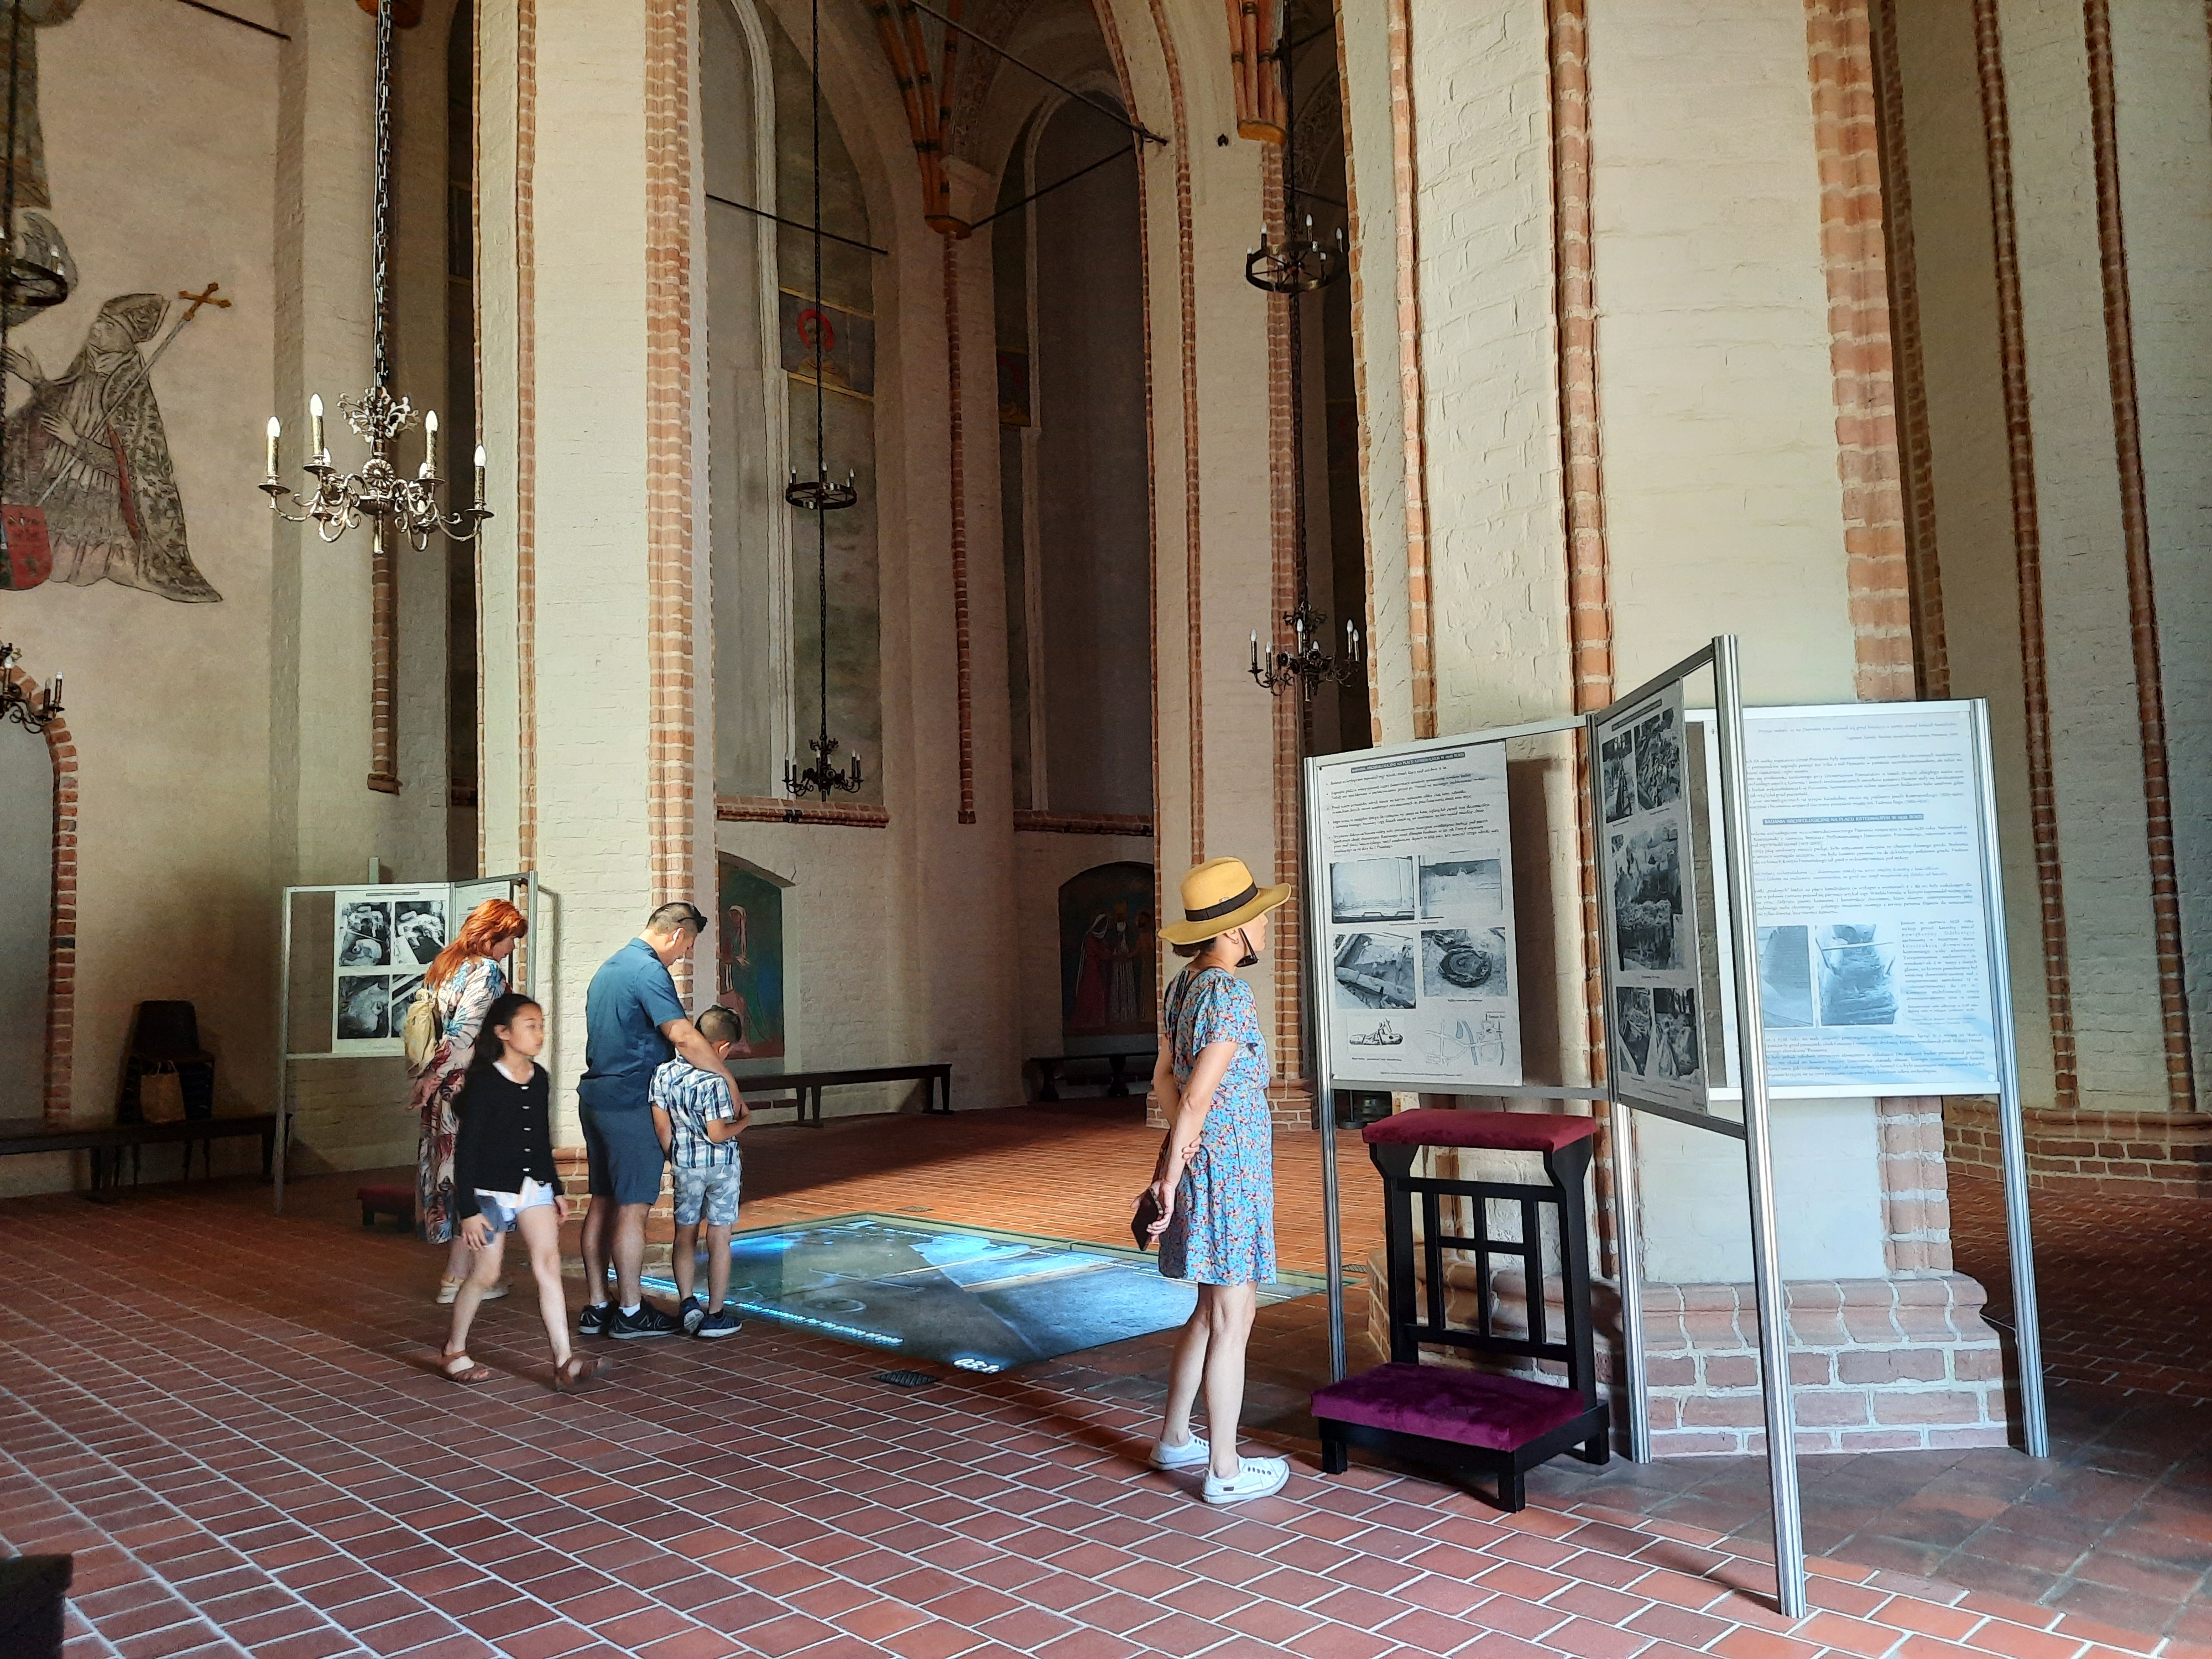 In search of the origins of Poznań. Temporary exhibition in the Church of Blessed Virgin Mary.